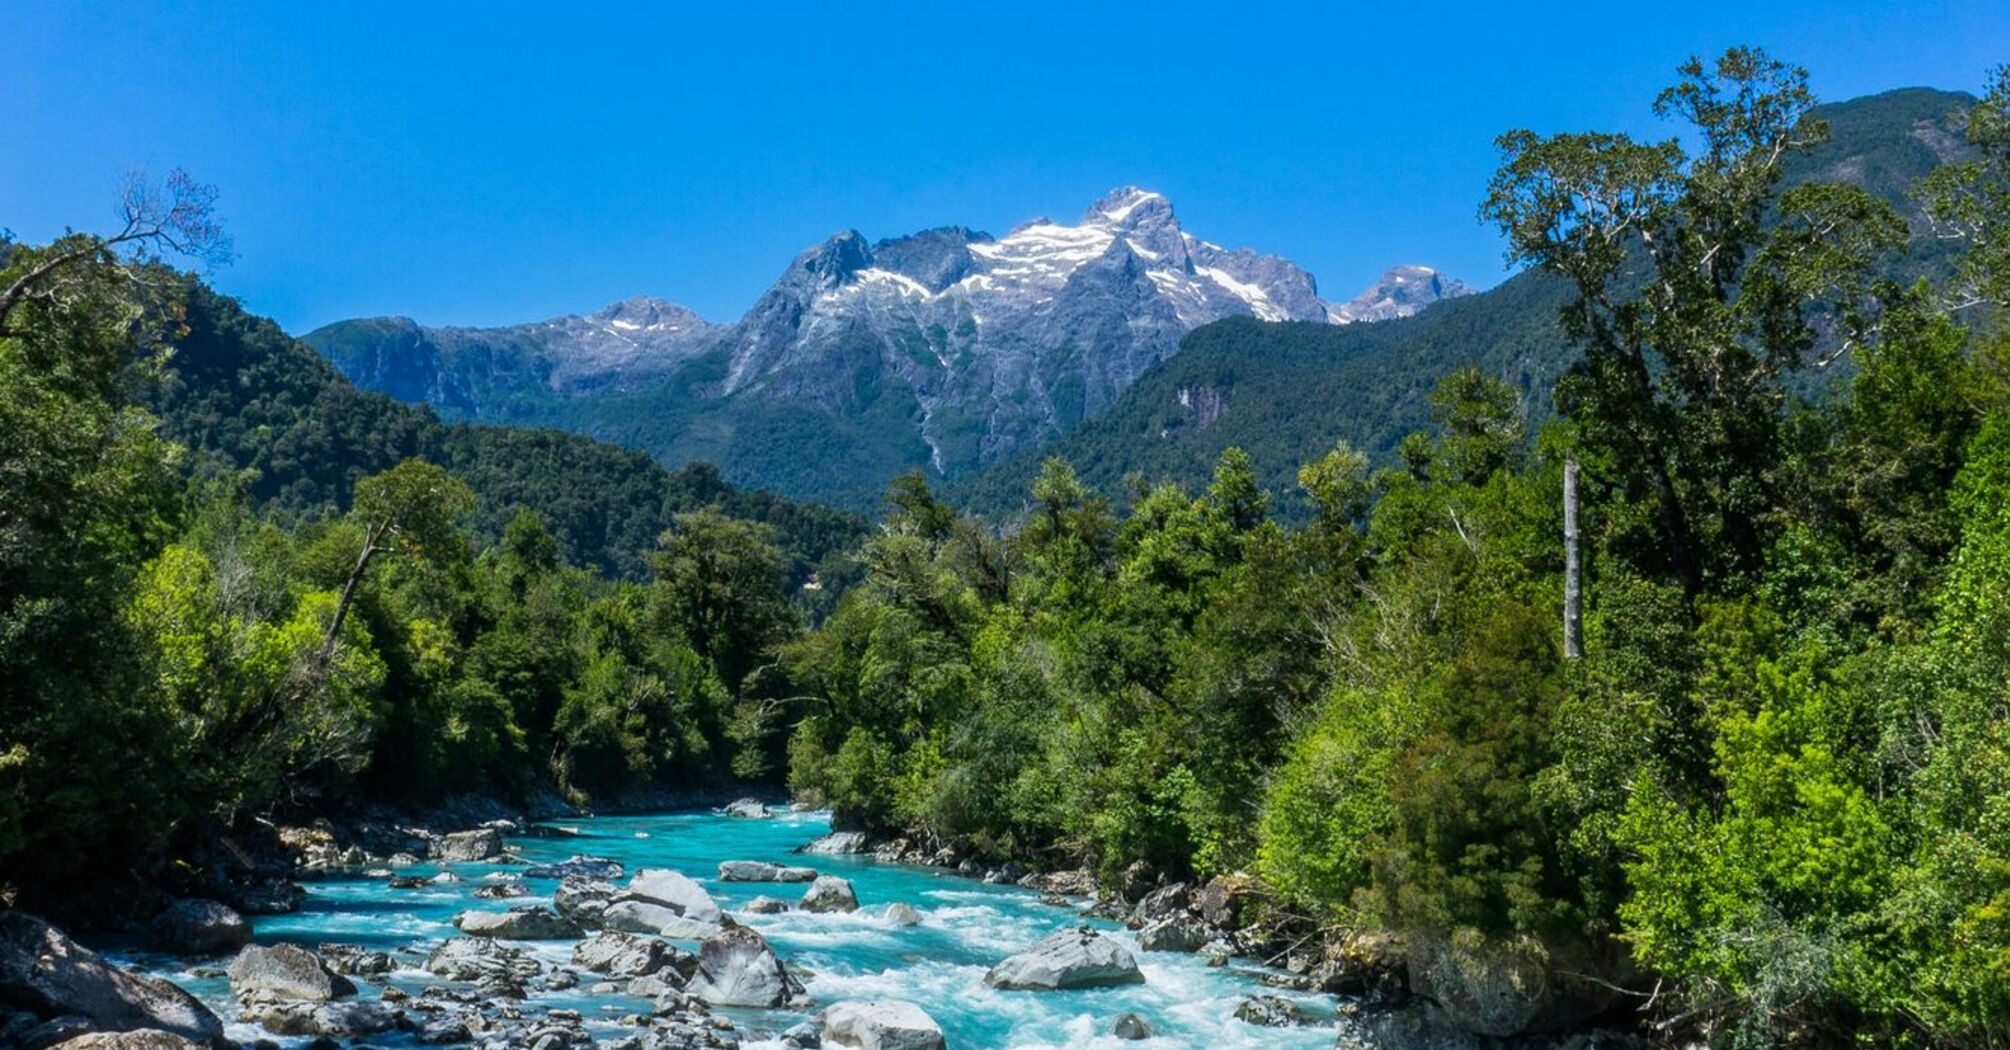 River and trees against the background of mountains in Chile